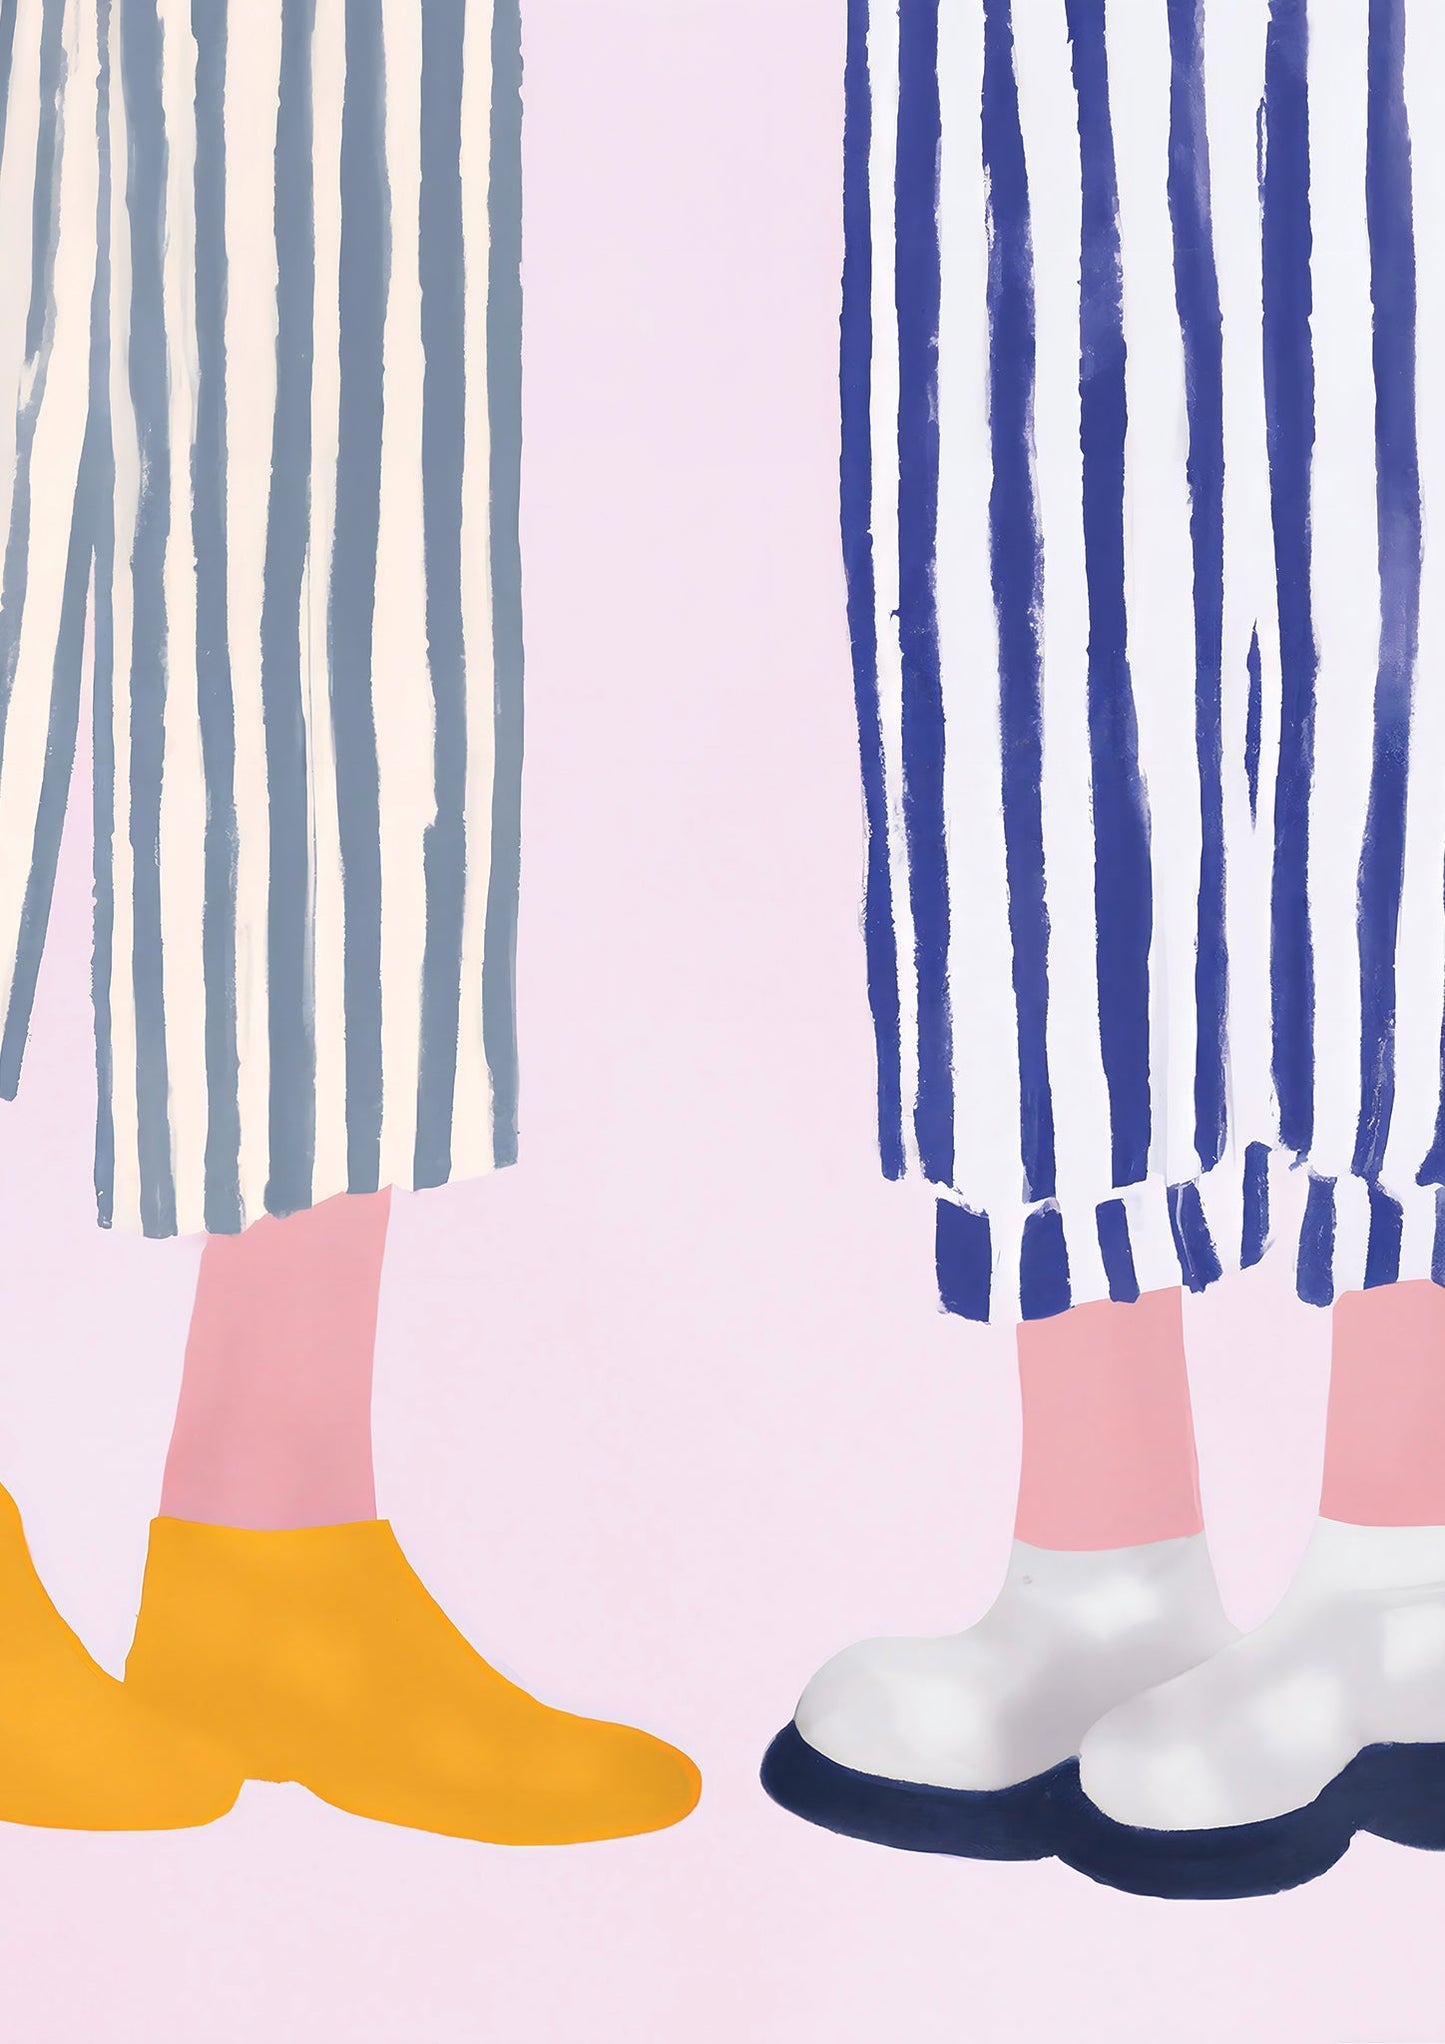 Shoes & Striped Trousers Art Print